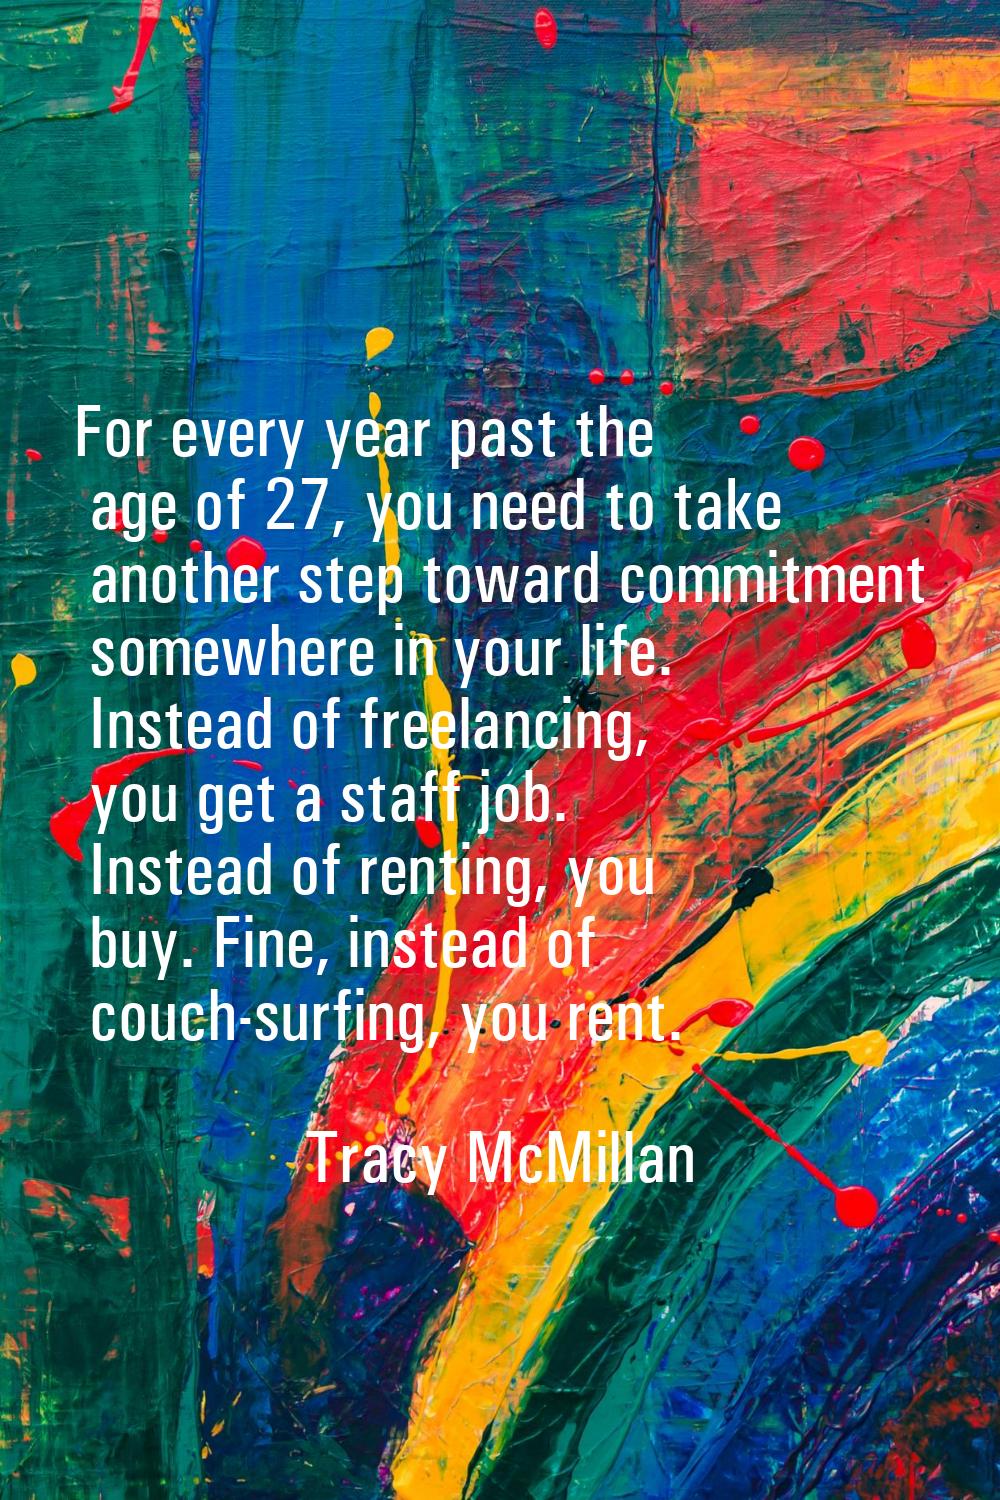 For every year past the age of 27, you need to take another step toward commitment somewhere in you